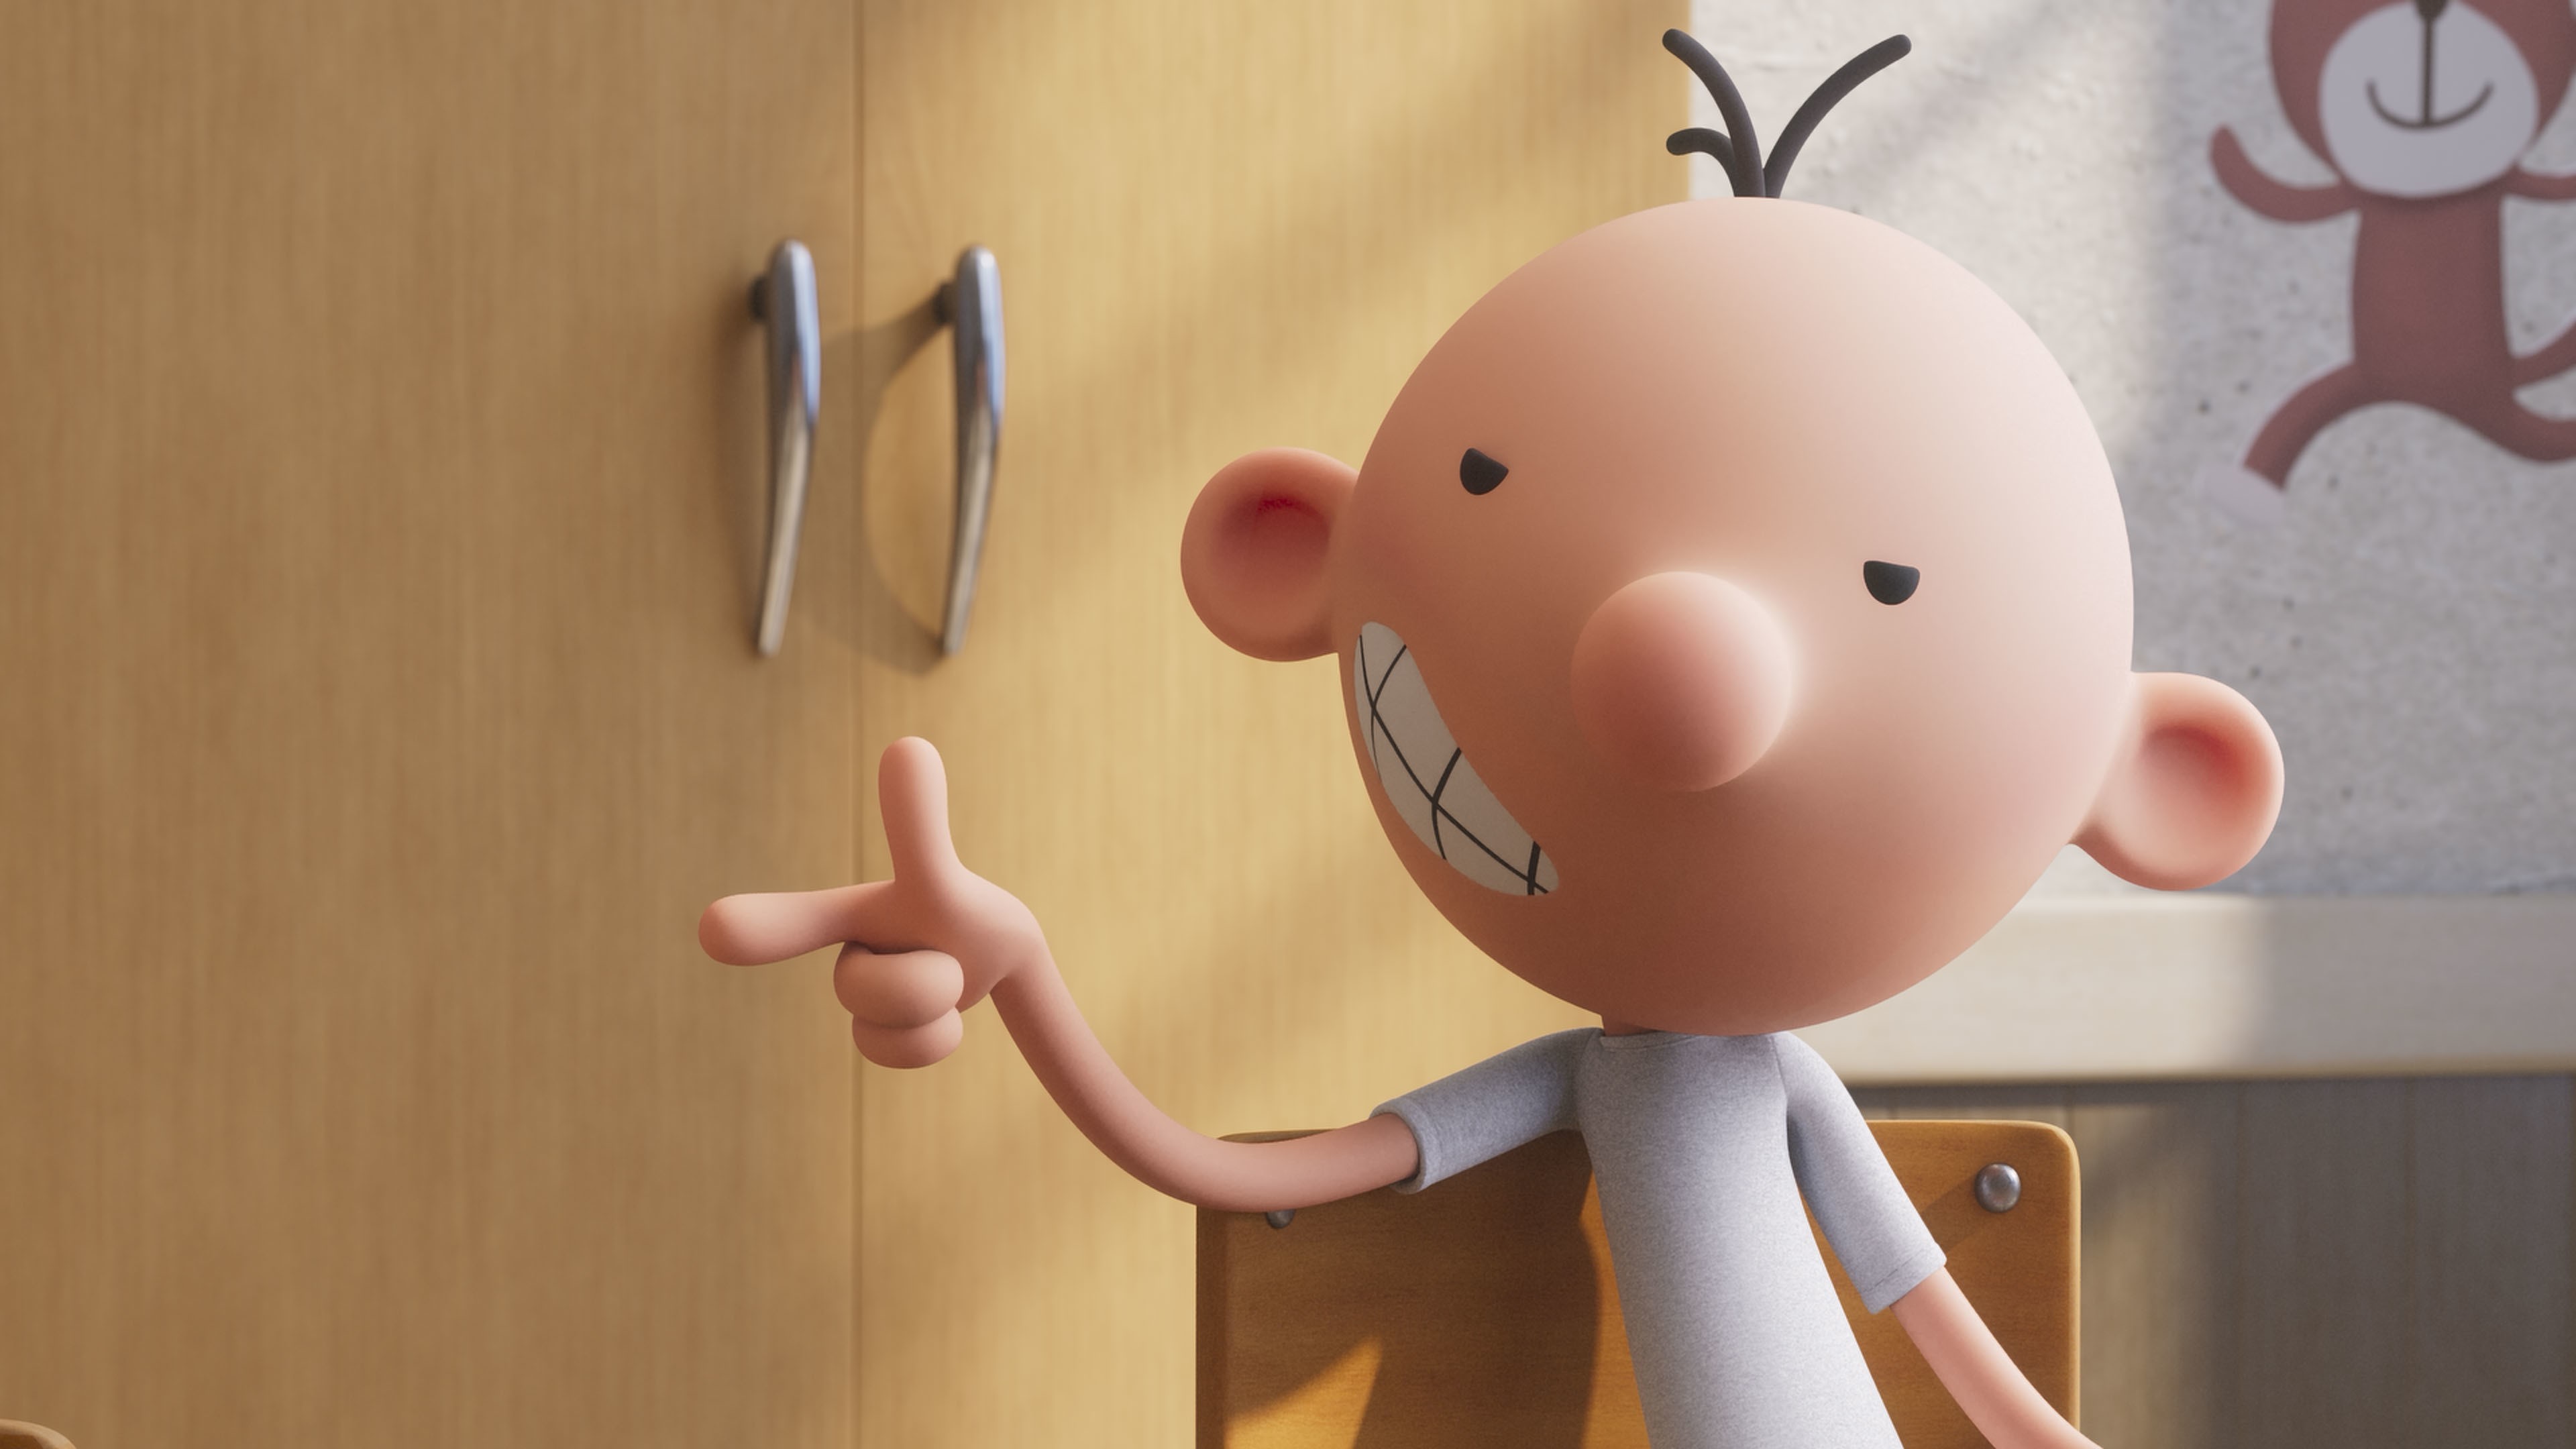 ‘Diary of a Wimpy Kid’ Runtime Revealed